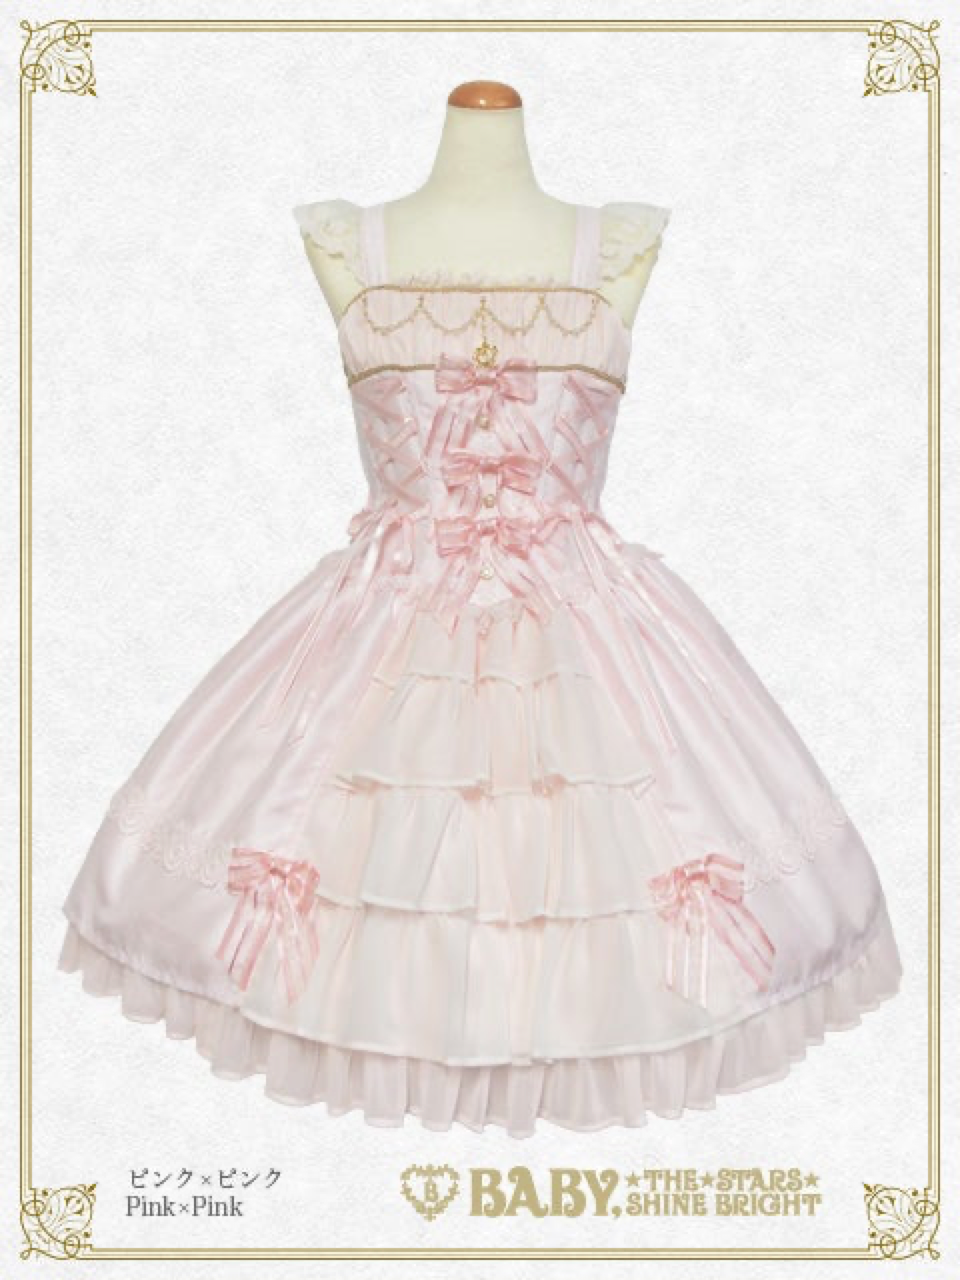 (Buyforme)Baby, The Stars Shine Bright~Blessing from Michael Pink JSK free size pink jsk (chest and front part are pink) 